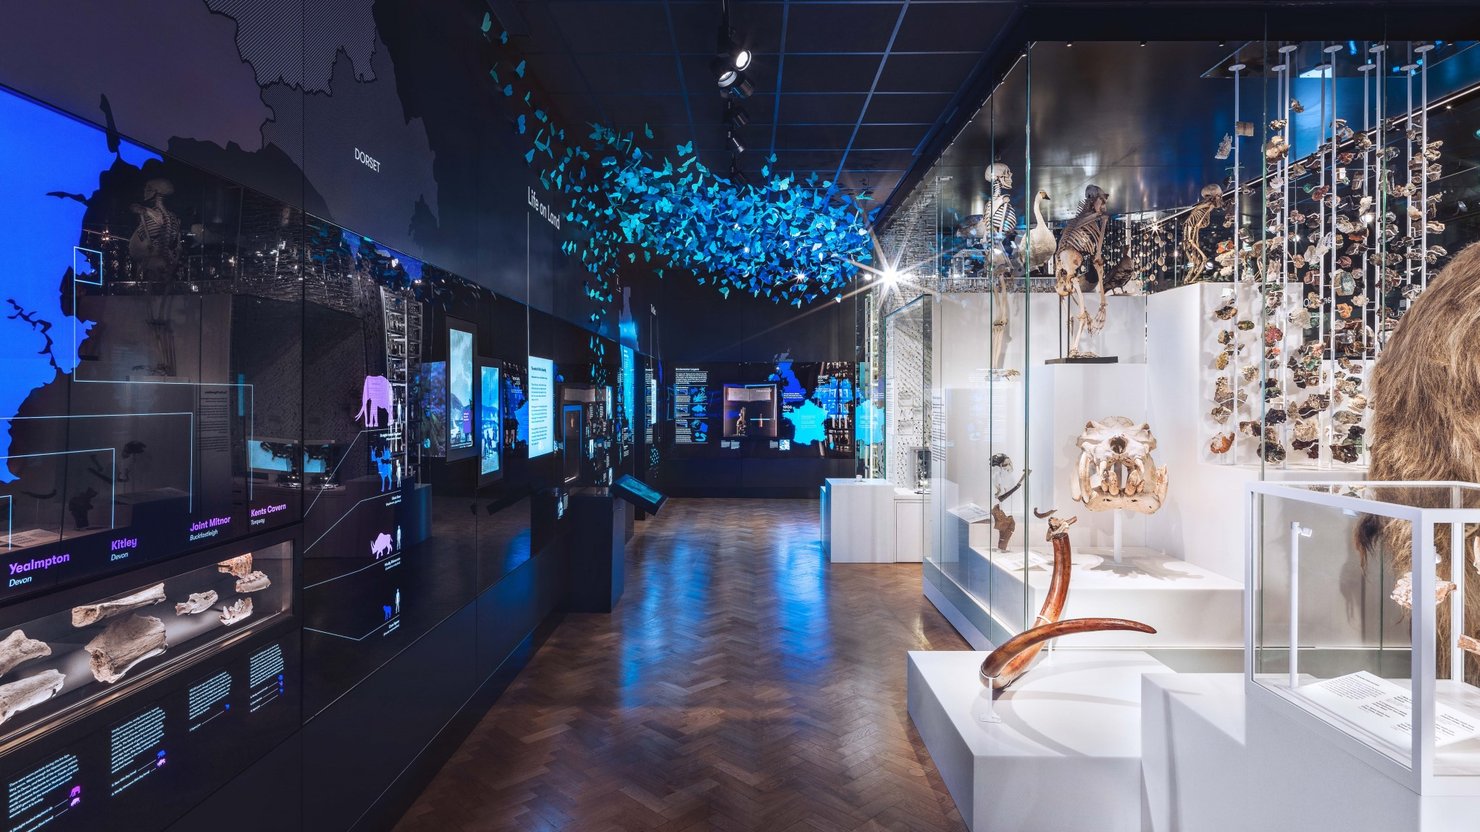 Mammoth gallery showing illuminated graphic panels opposite large display case